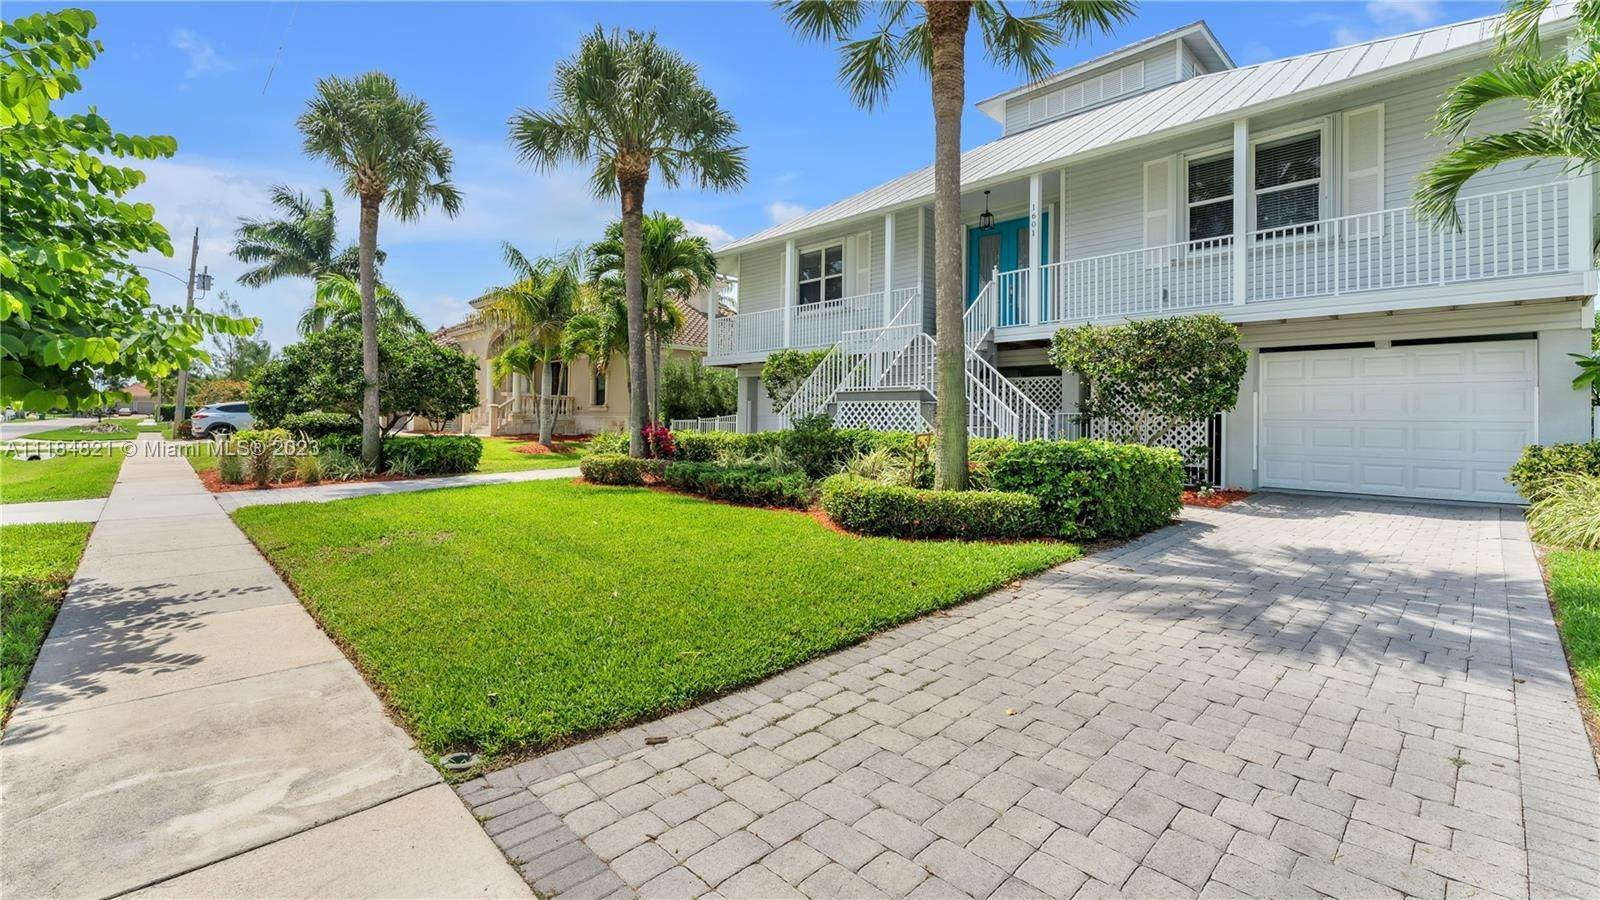 21. Single Family at Address Not Available Marco Island, FL 34145